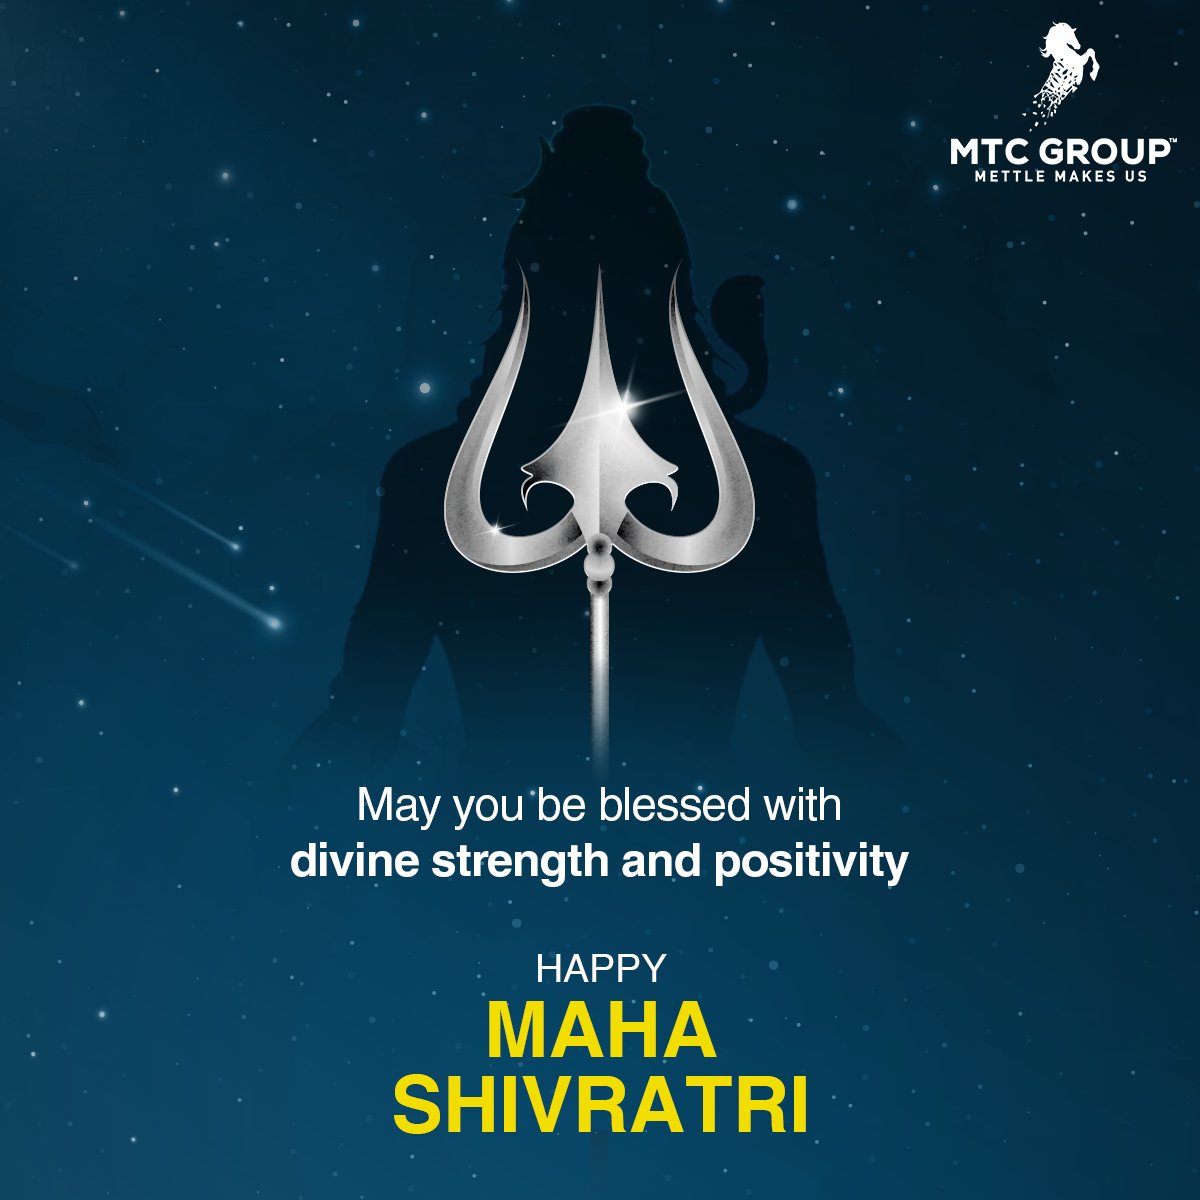 Happy Maha Shivratri to you and your loved ones. #MTCGroup #Shivratri #LordShiva #Mahashivratri #Shivratri2024 #ShivaBlessings #Festival #ShivratriCelebrations